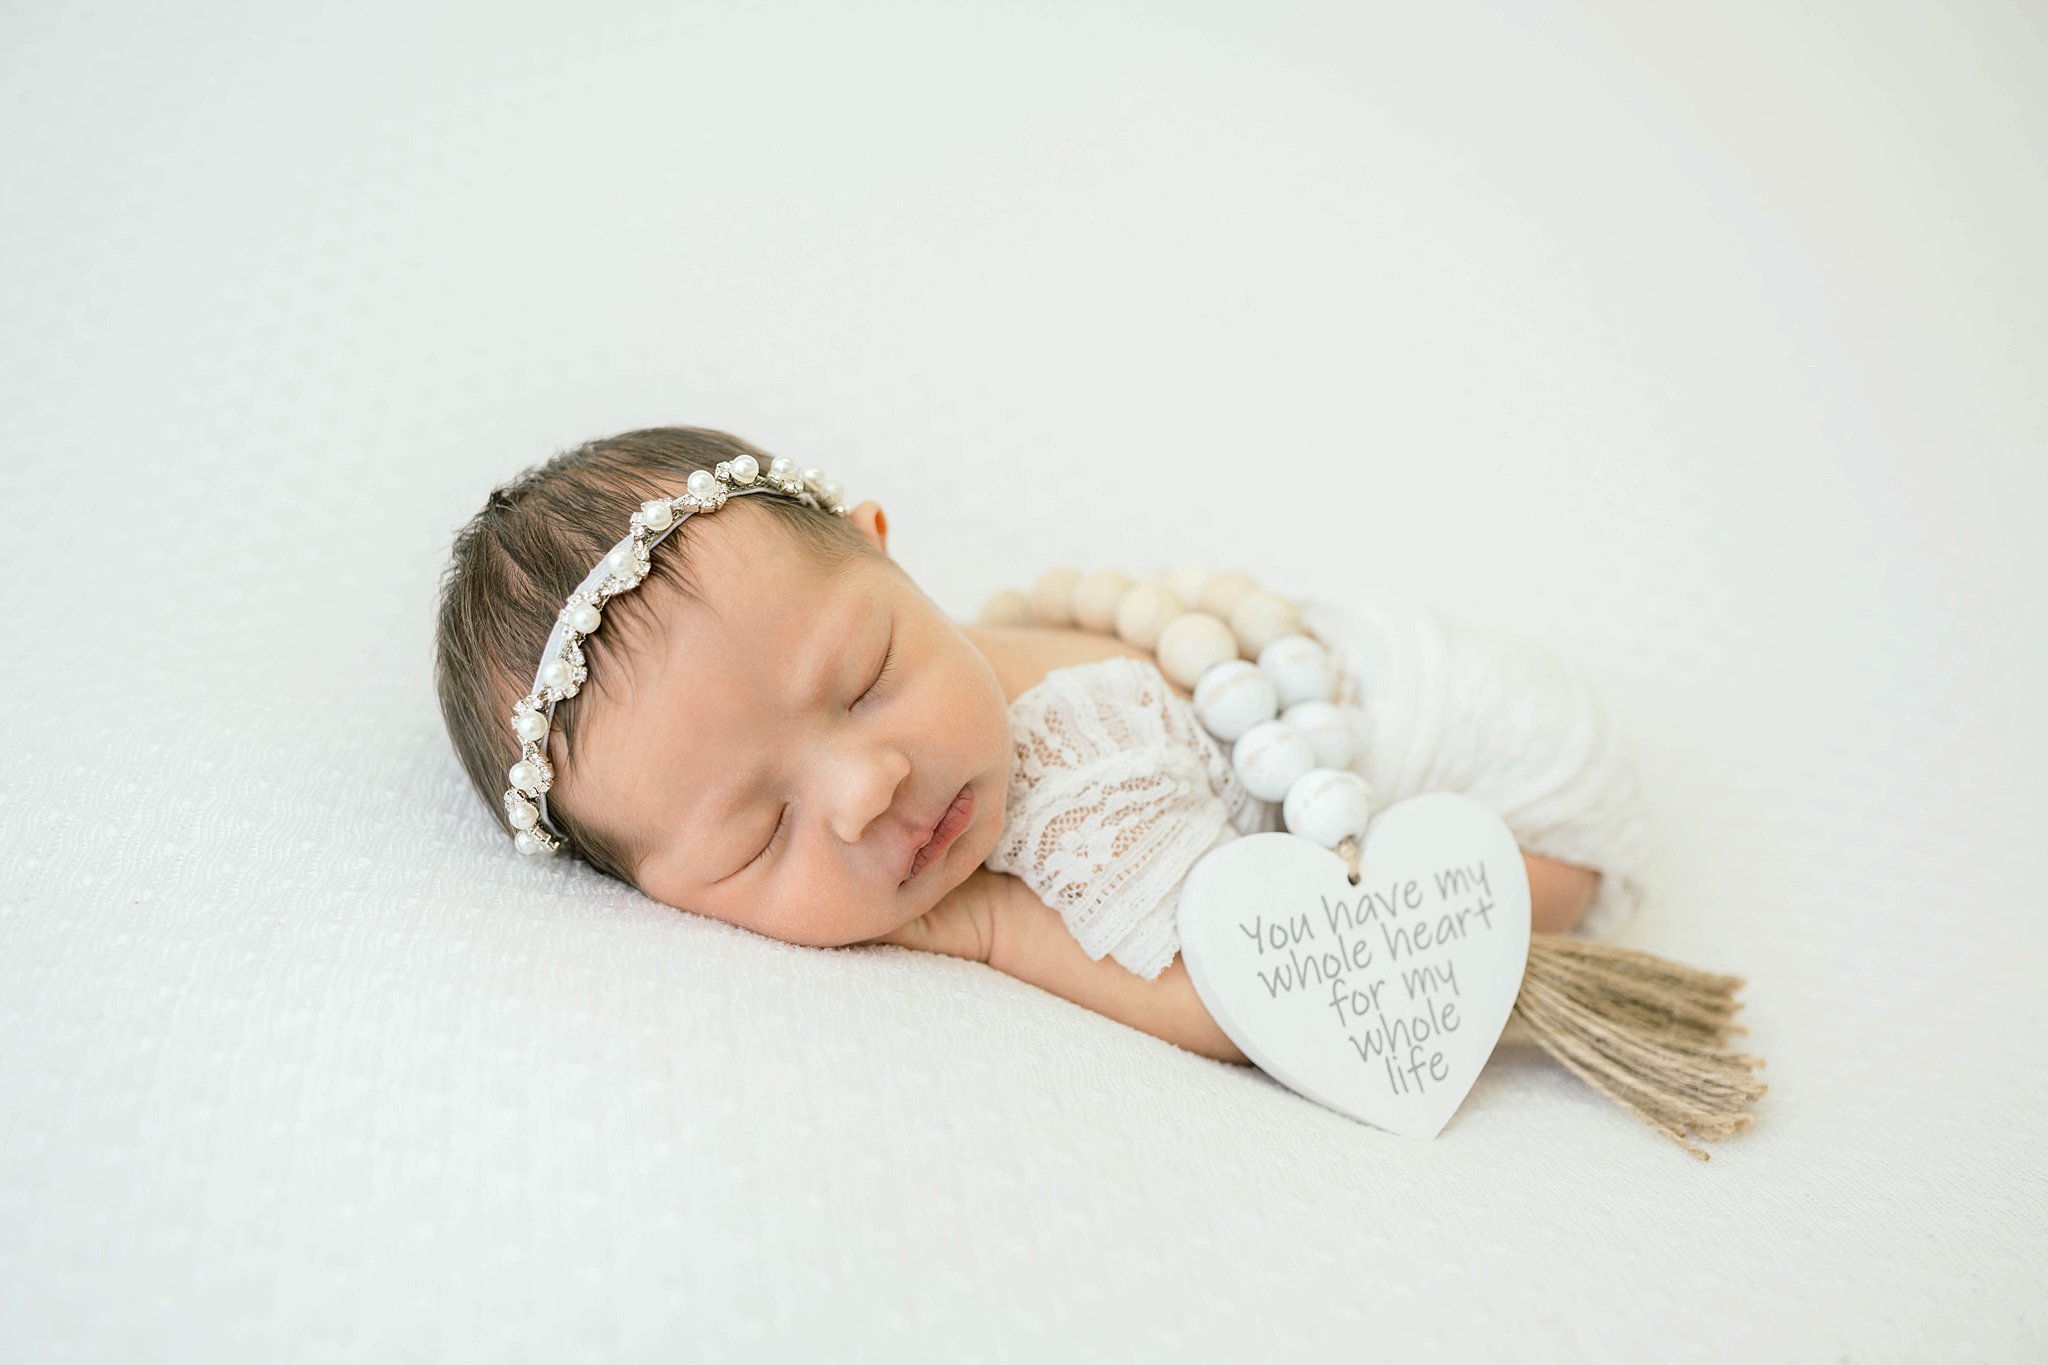 A newborn baby sleeps in a lace onesie with a heart necklace draped over her